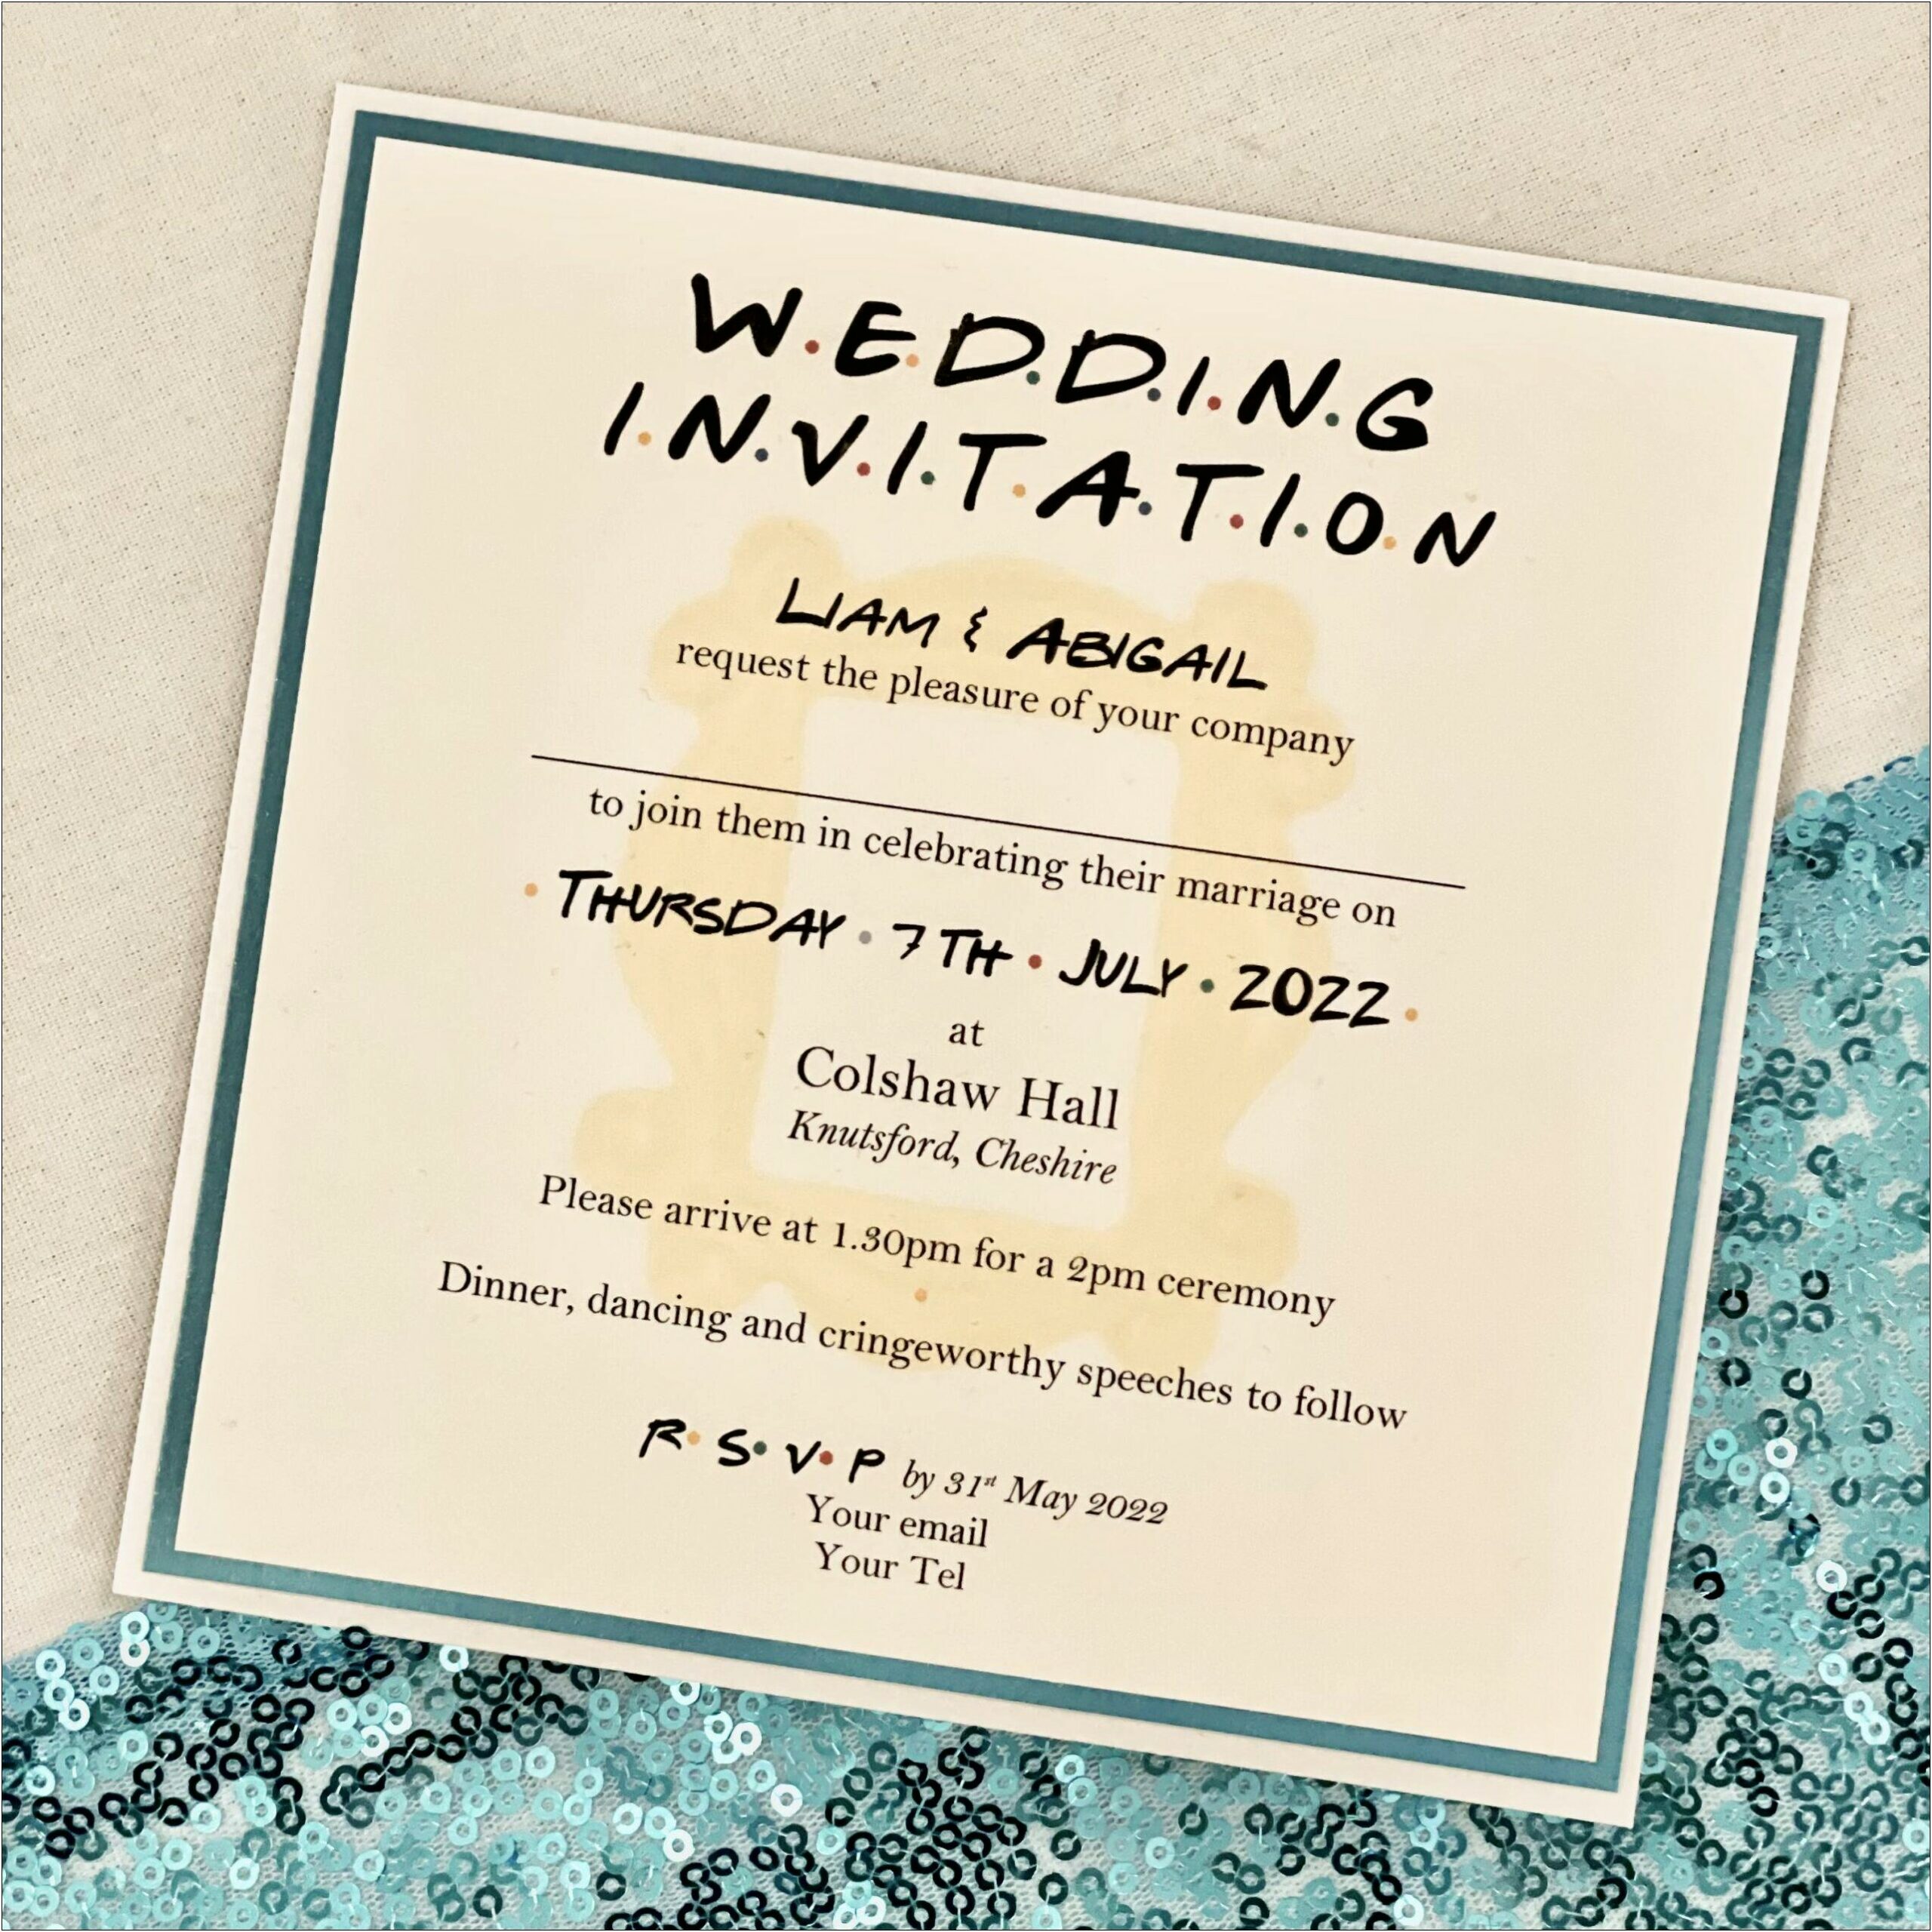 Email For Wedding Invitation To Friends